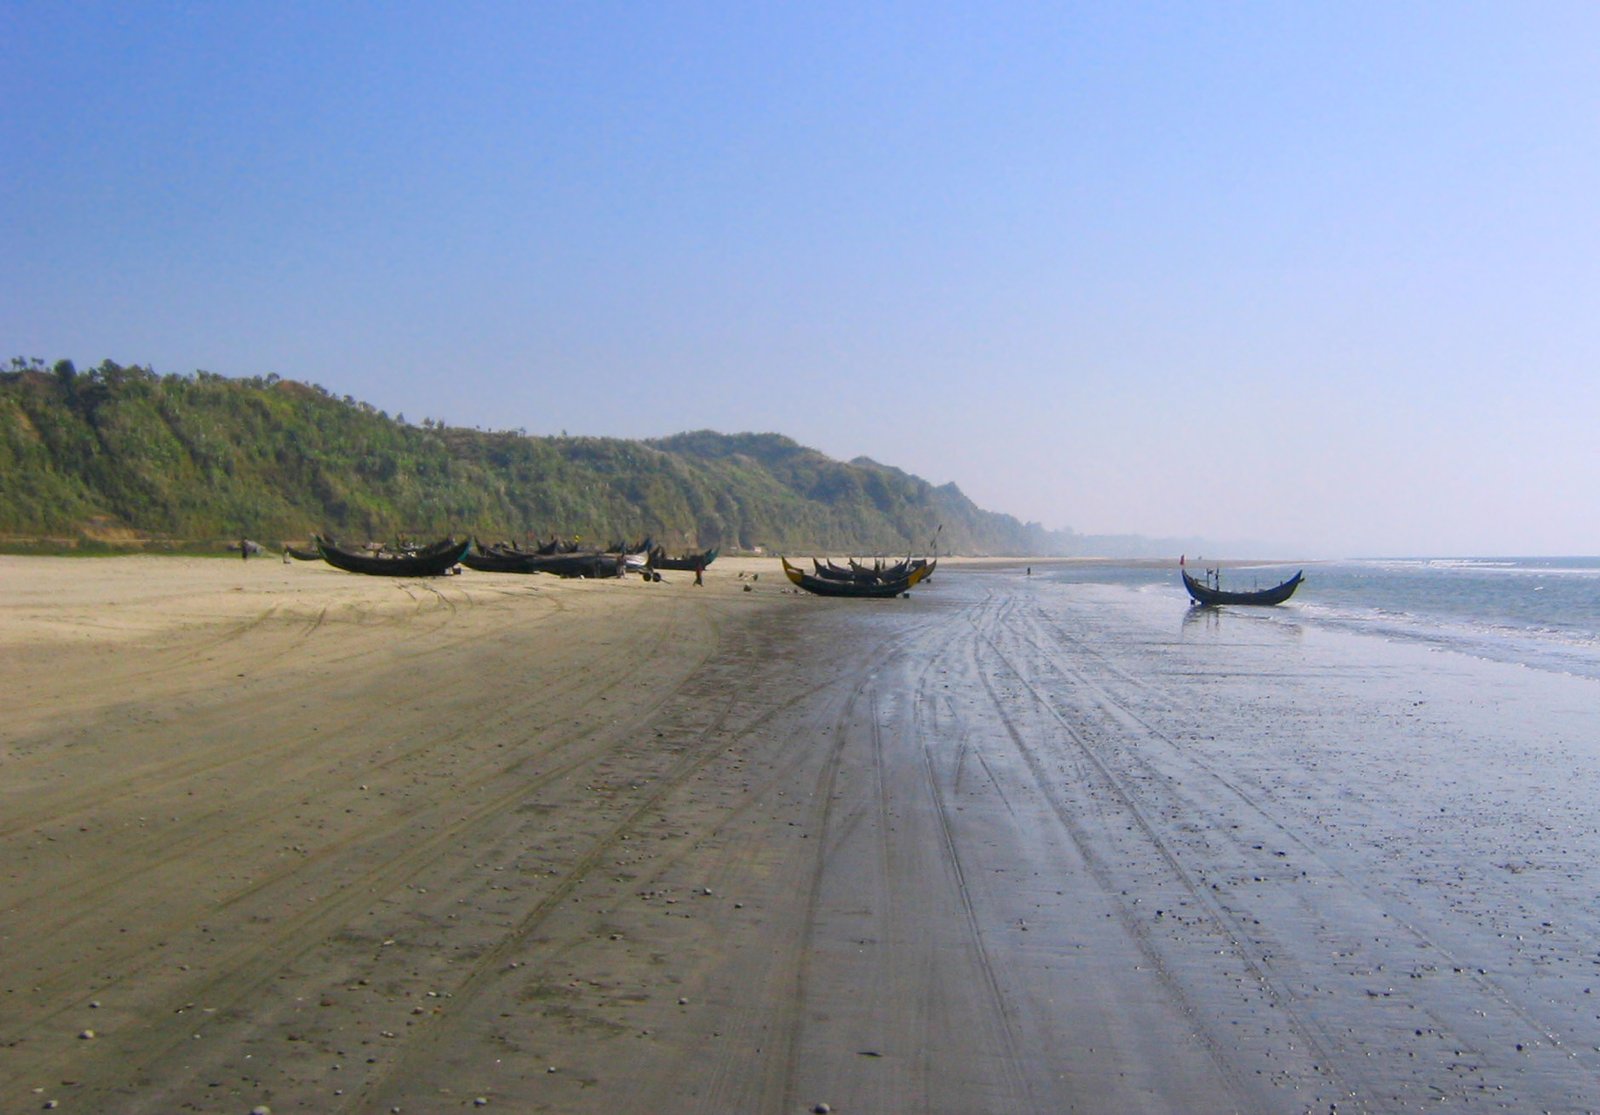 Bazar Beach is 75 miles long and is one of the longest beaches in the world.